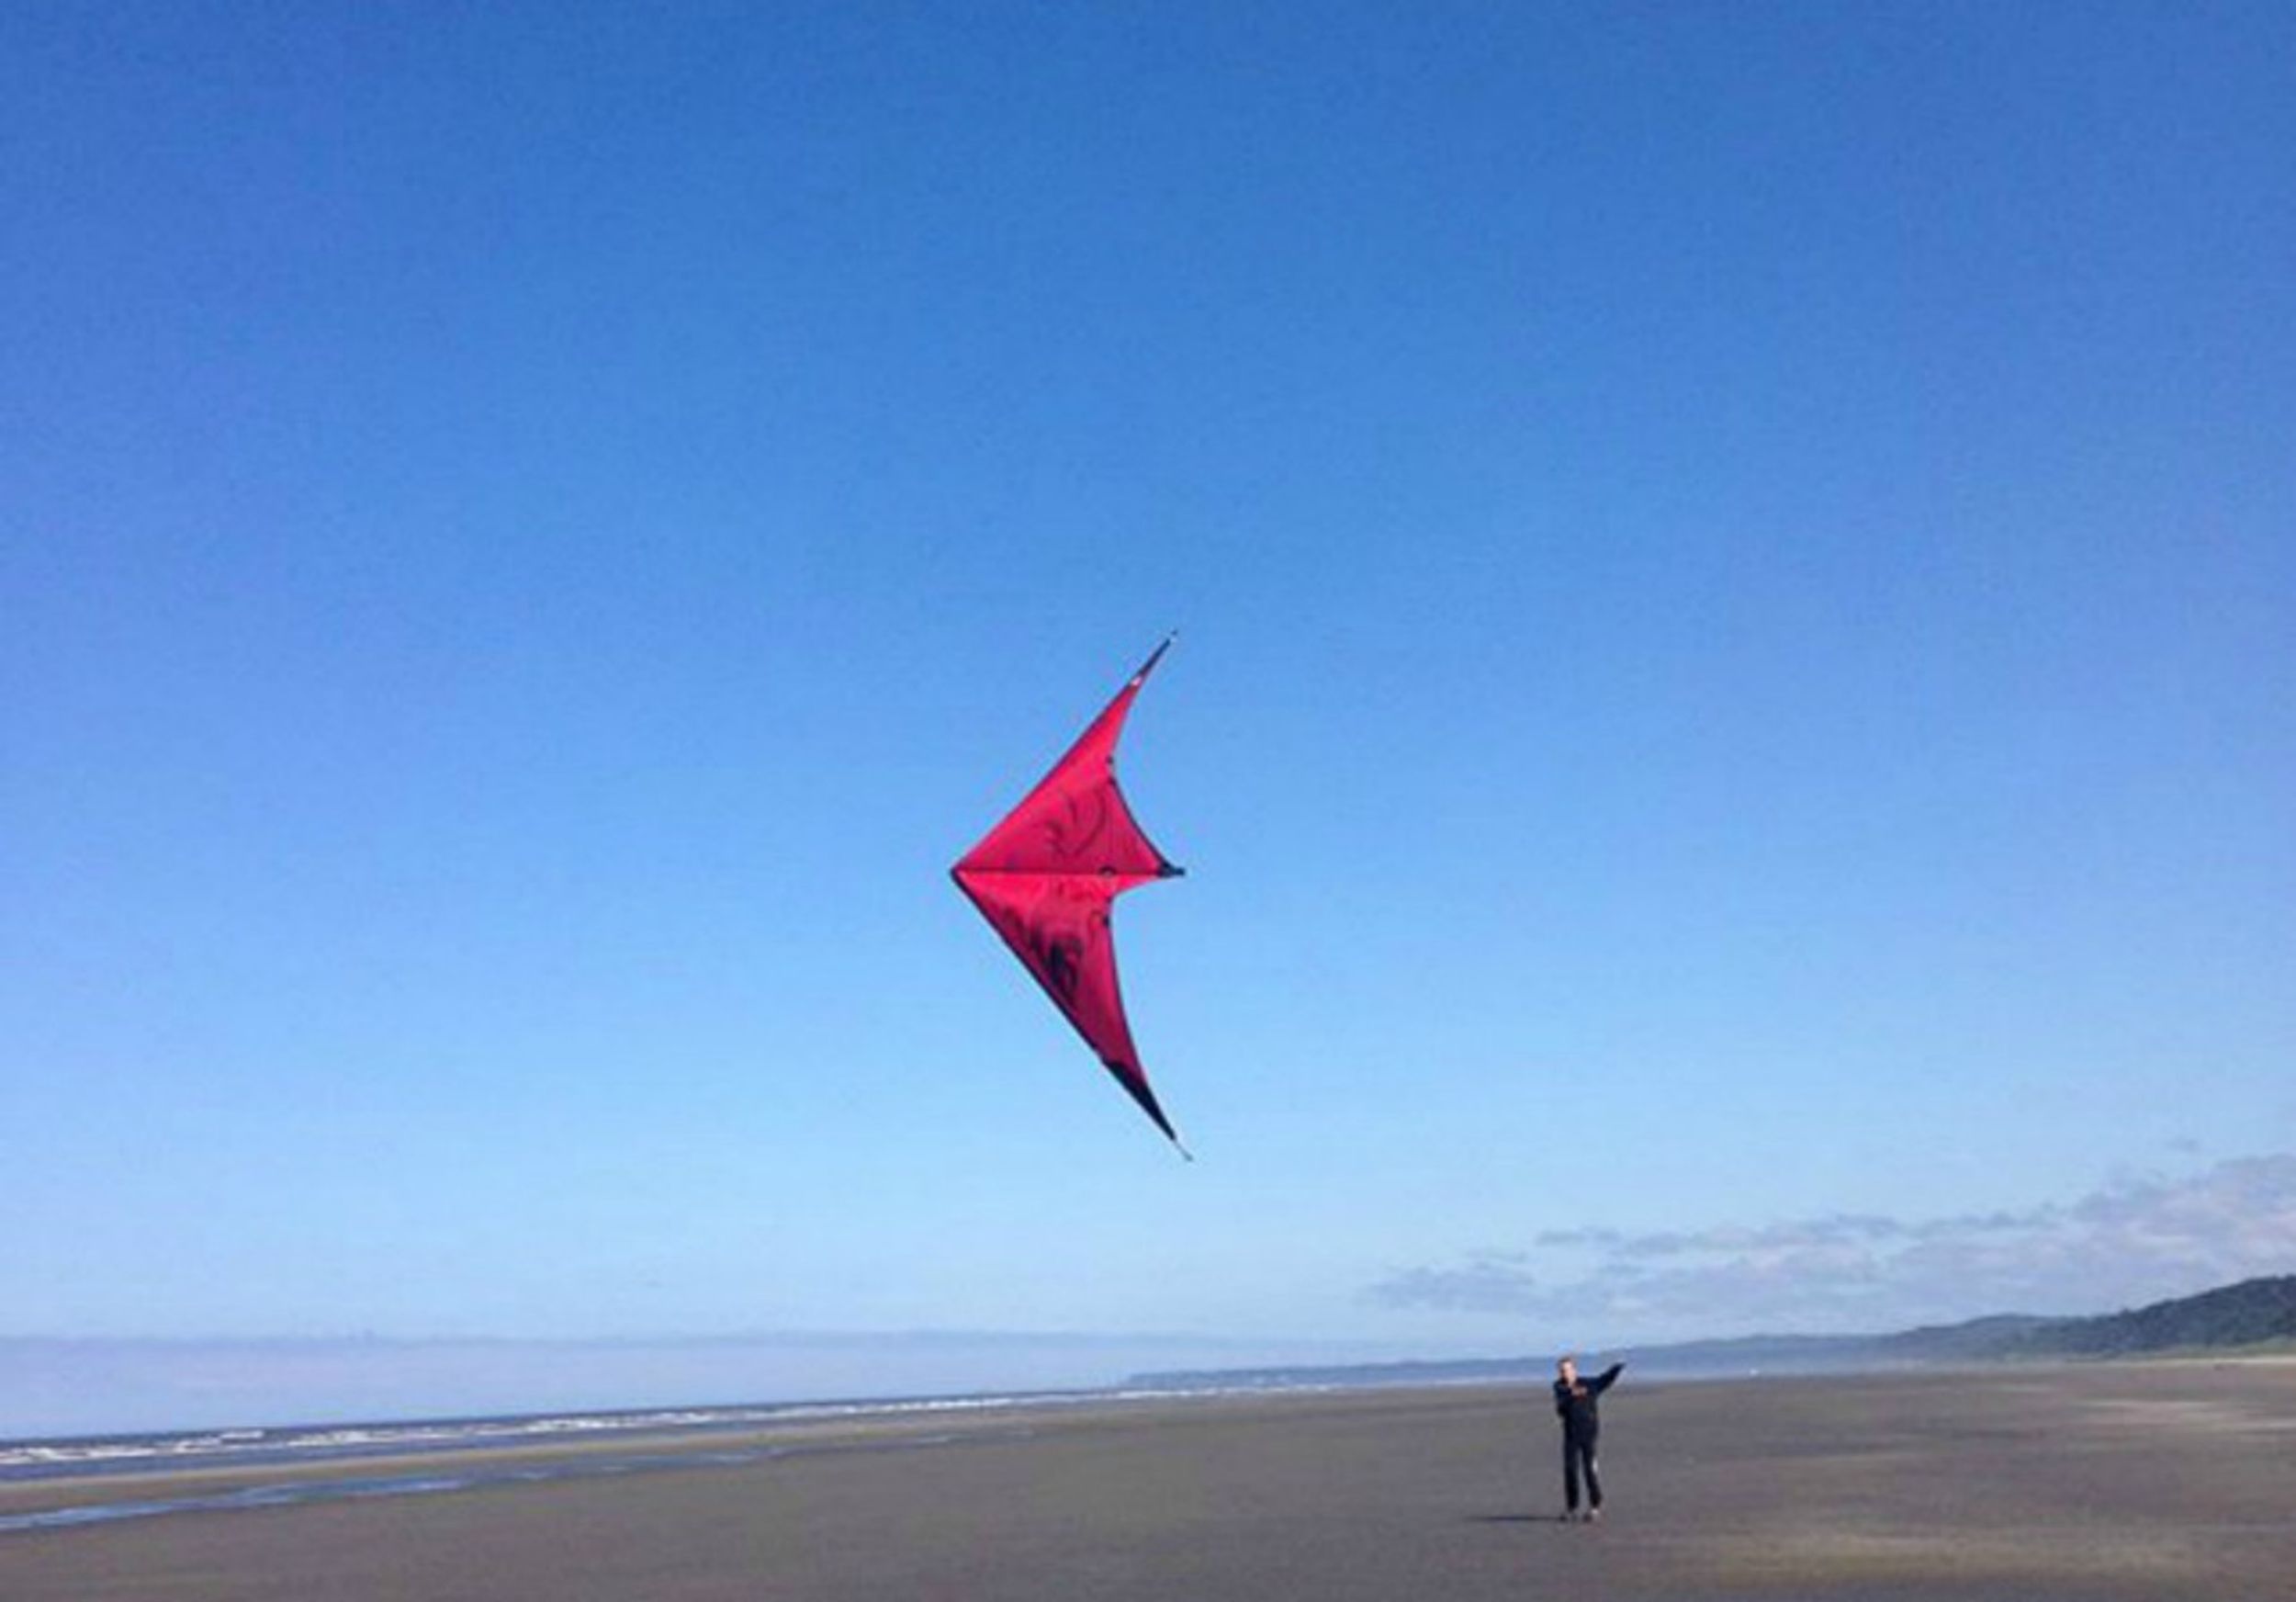 Poetry On Odyssey: My Brother's Kite